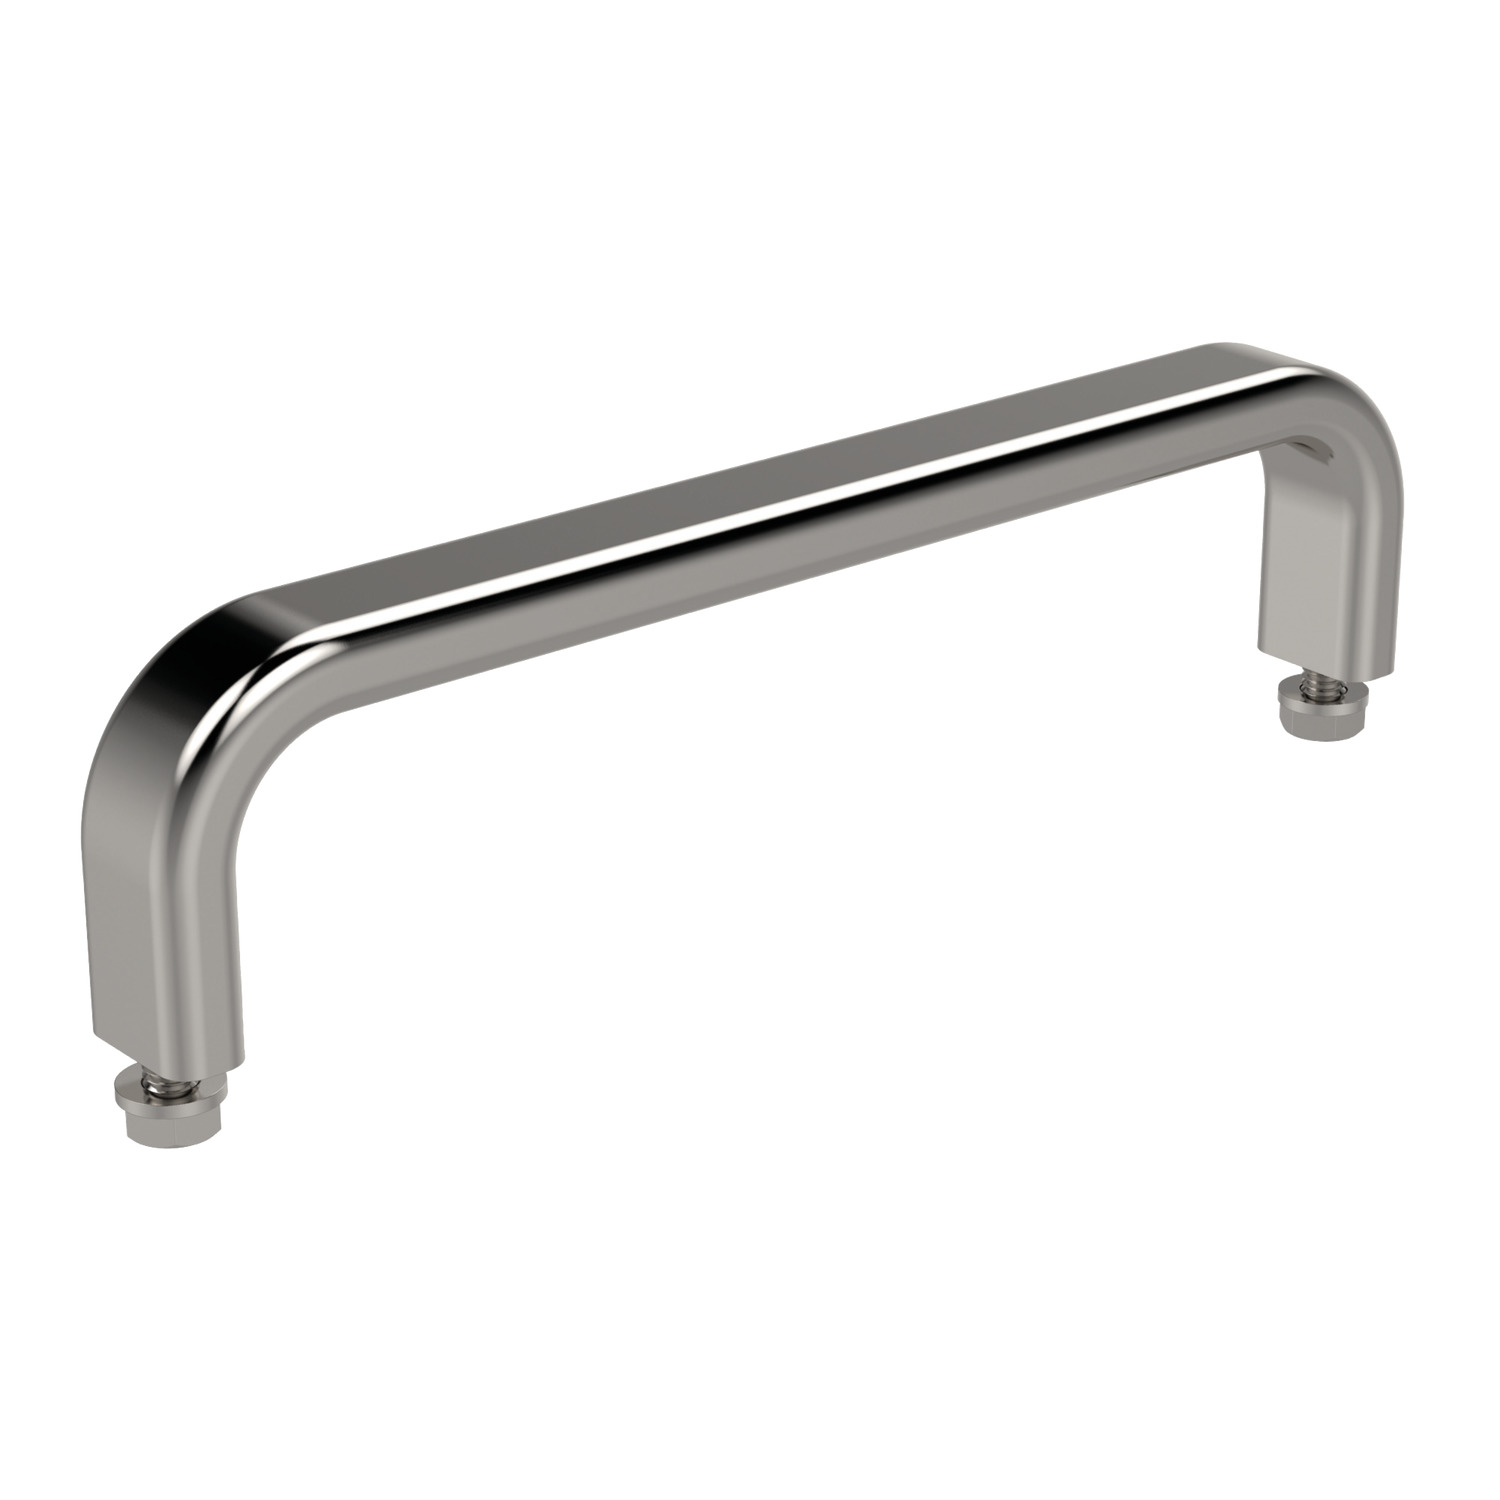 Product 78920, Pull Handles - Oval Type stainless steel / 